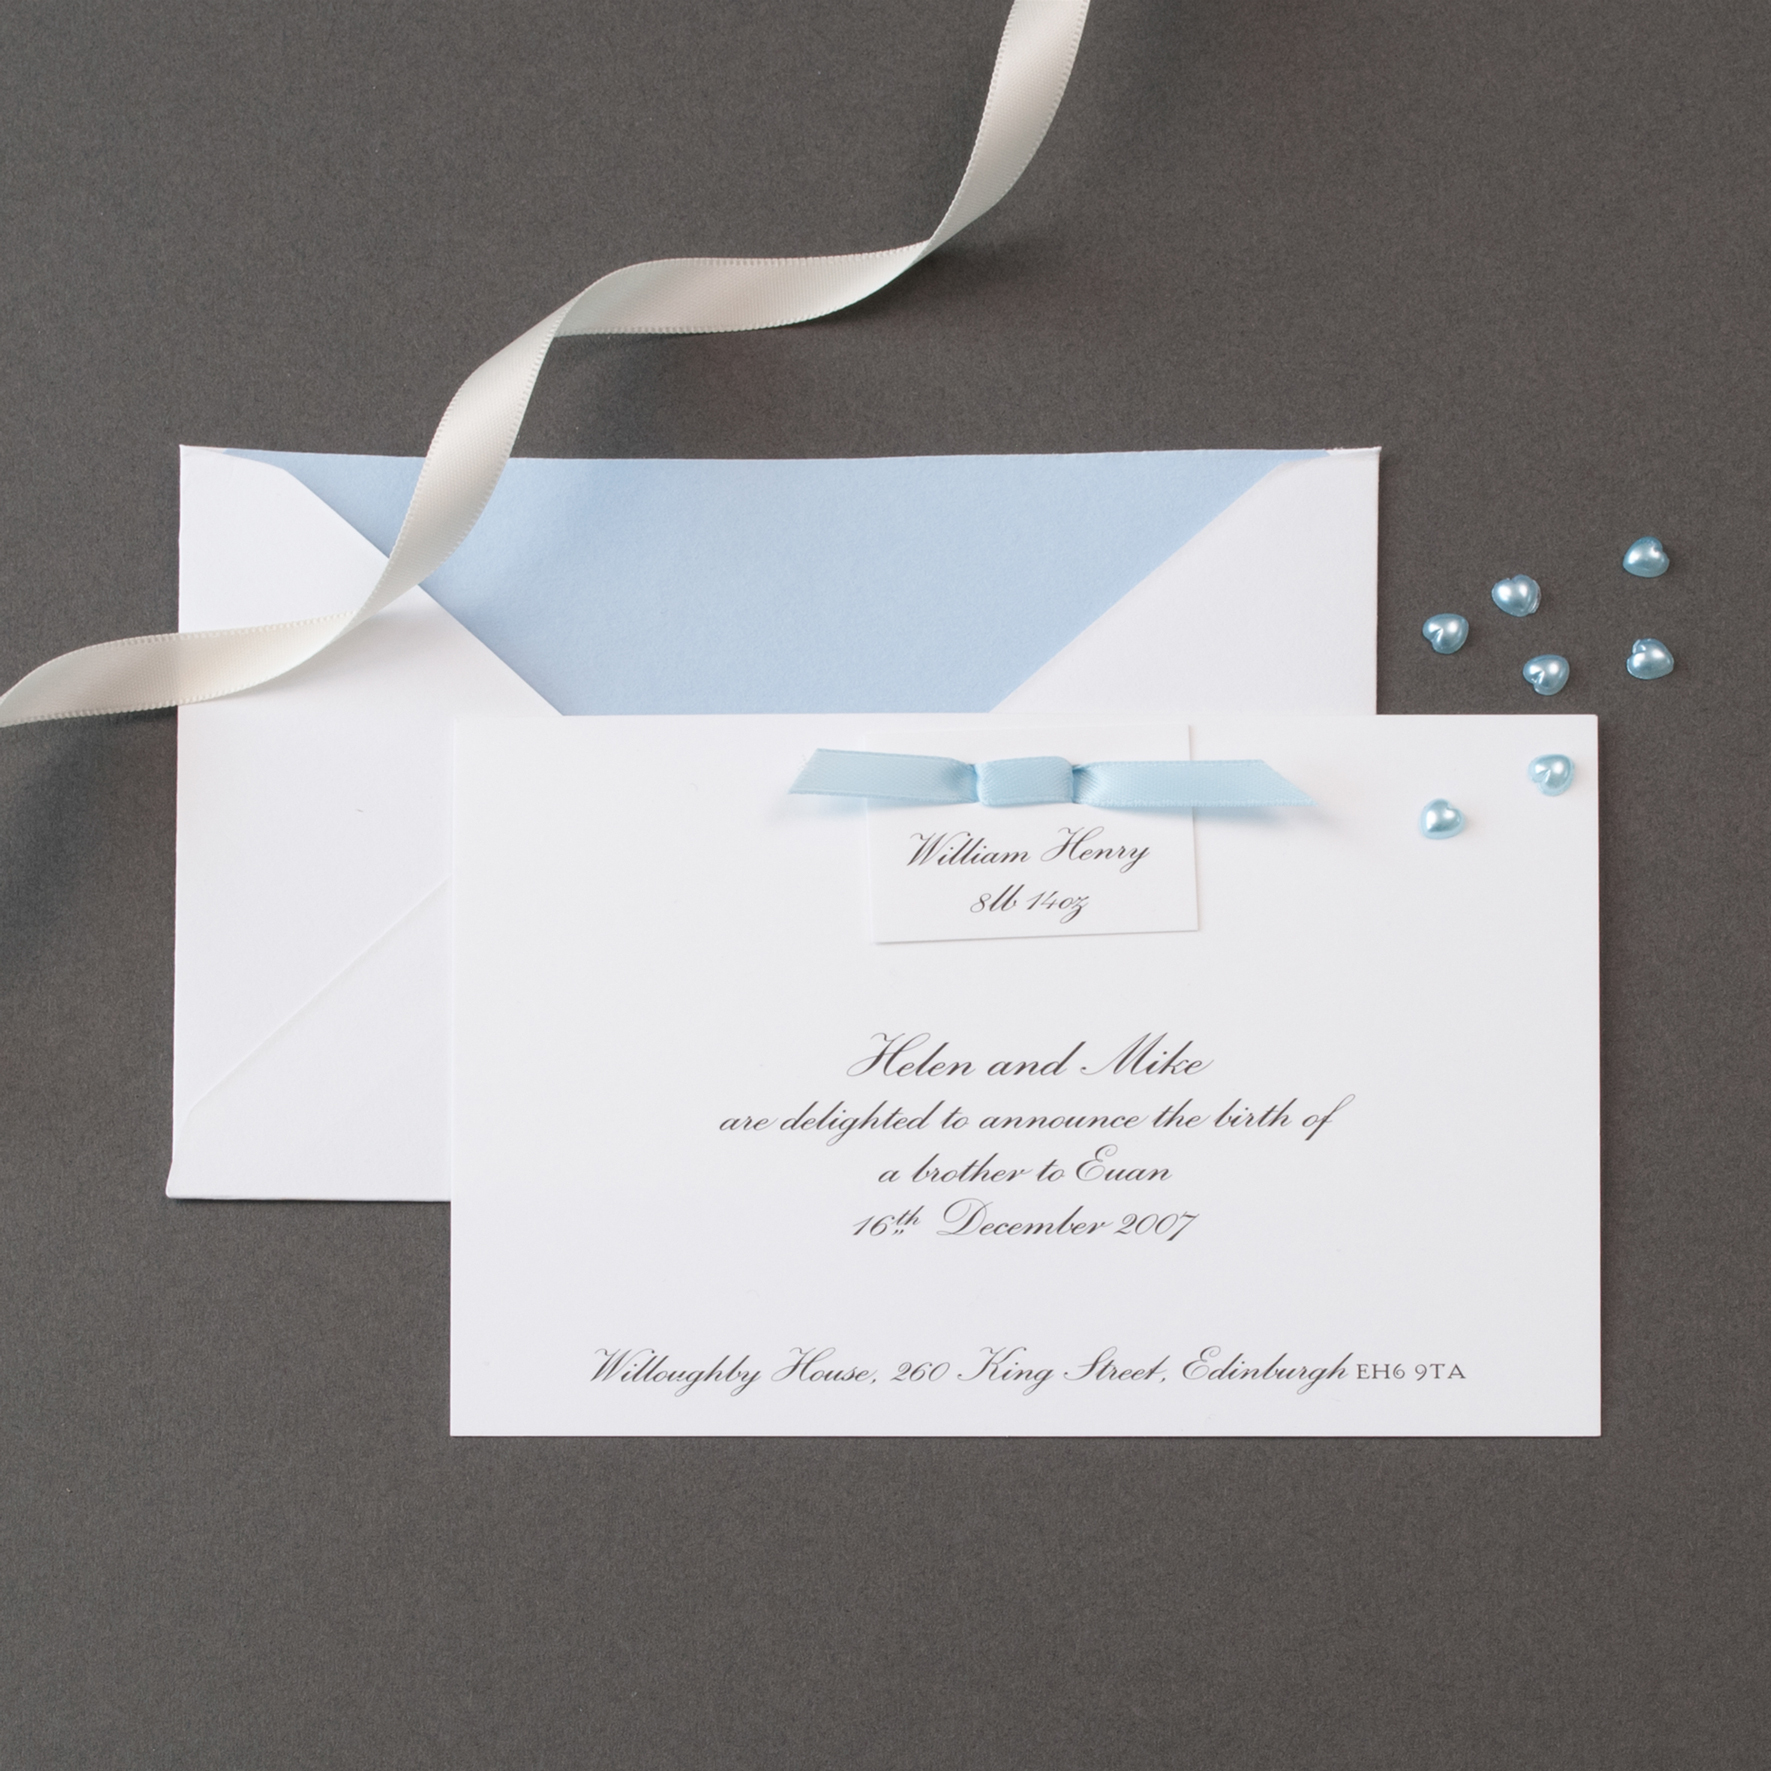 Luxury Birth Announcements Cards | The 